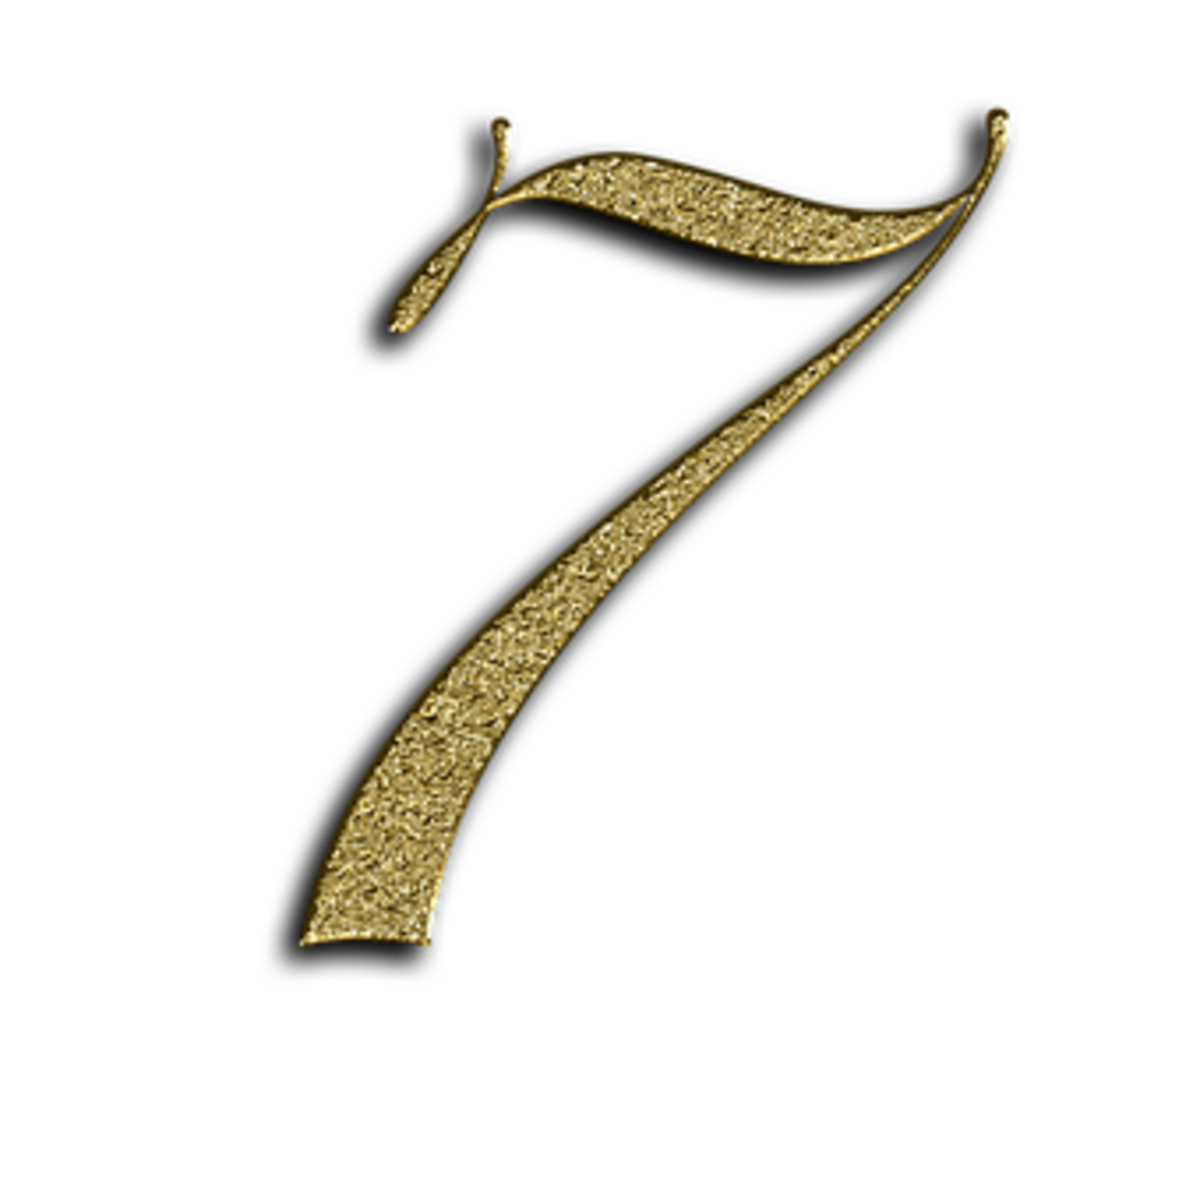 Numerology-The Number 7